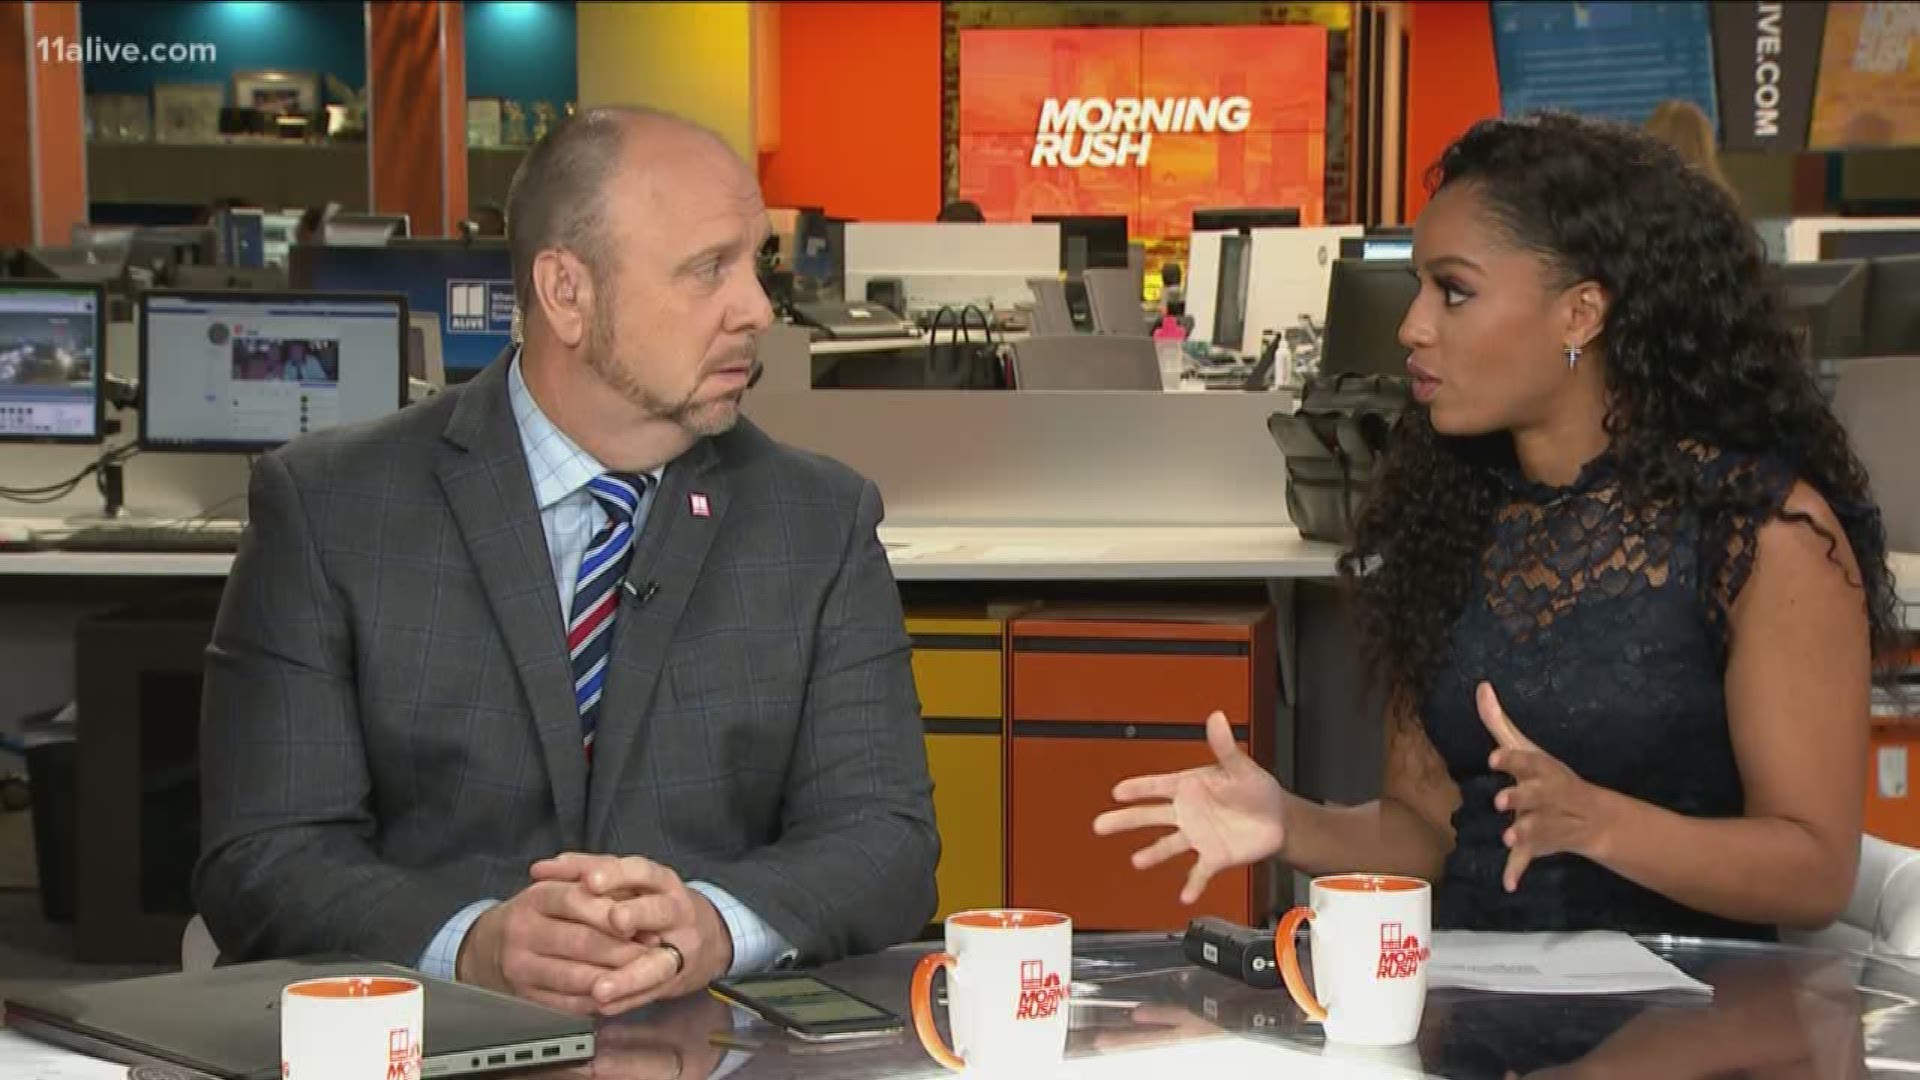 The 11Alive Morning Rush Anchor team discusses the new feature.